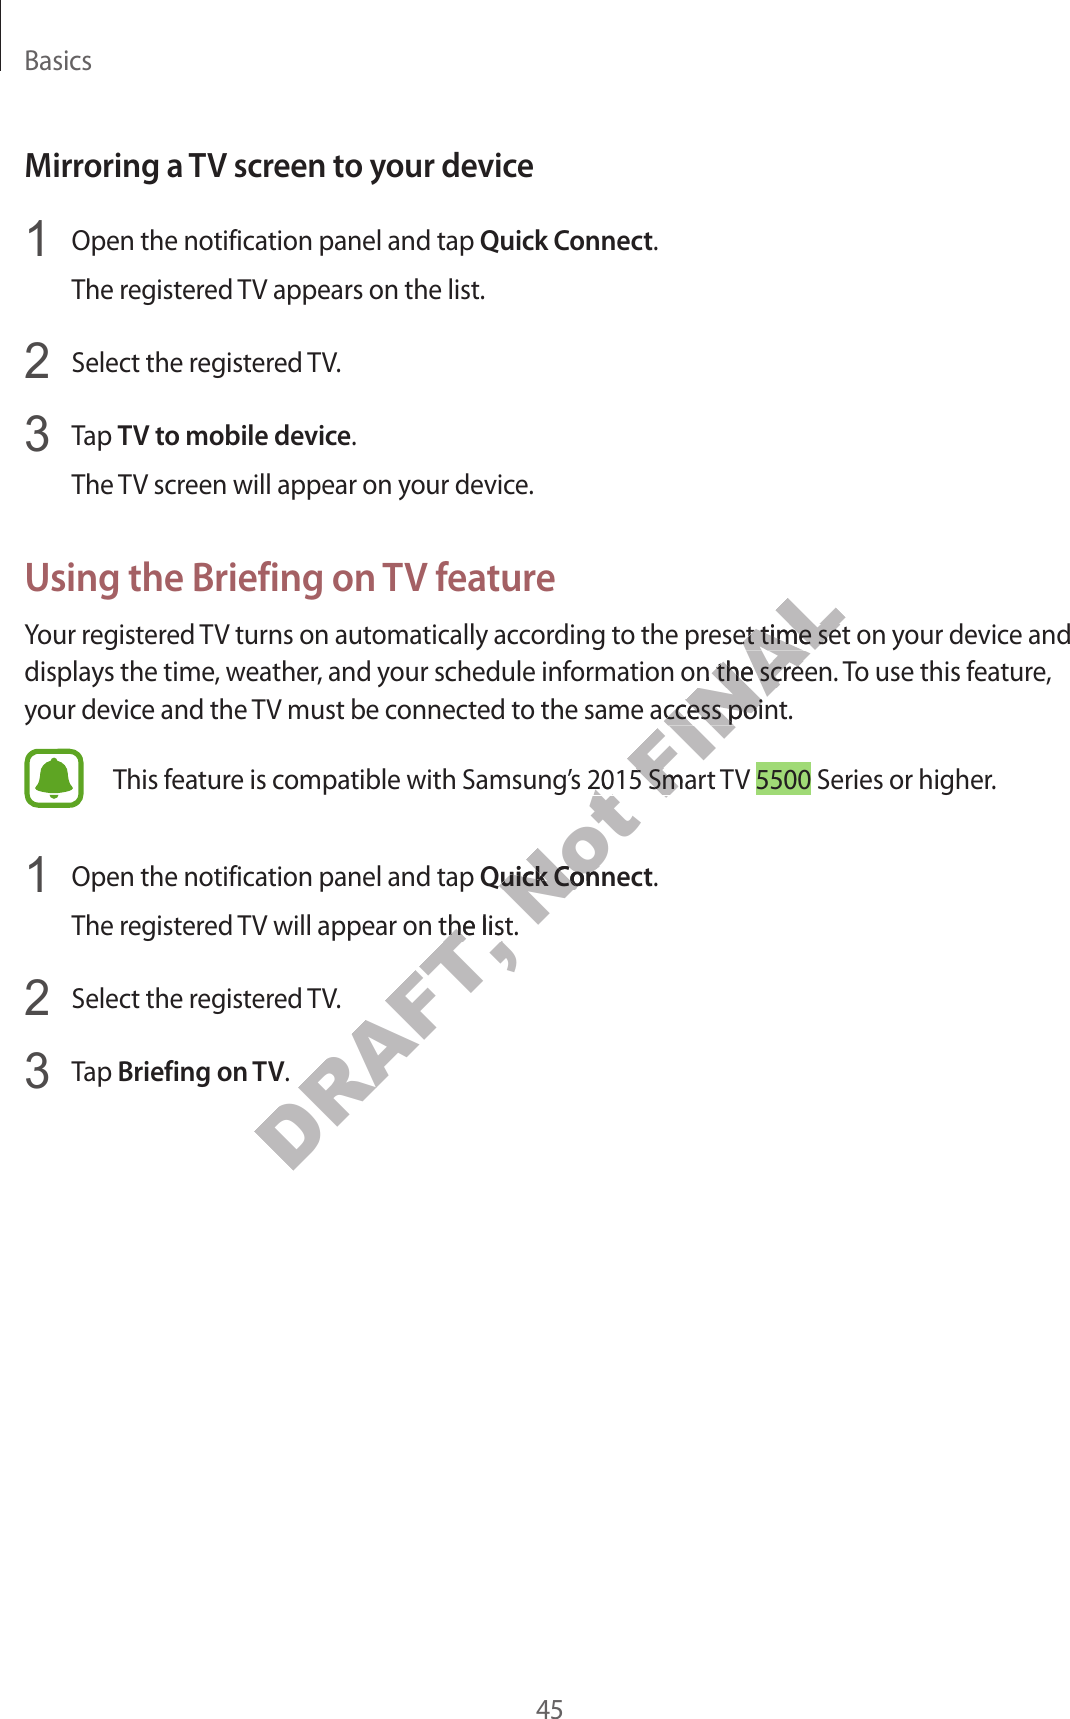 Basics45Mirroring a TV screen to your device1  Open the notification panel and tap Quick Connect.The registered TV appears on the list.2  Select the registered TV.3  Tap TV to mobile device.The TV screen will appear on your device.Using the Briefing on TV featureYour registered TV turns on automatically according to the preset time set on your device and displays the time, weather, and your schedule information on the screen. To use this feature, your device and the TV must be connected to the same access point.This feature is compatible with Samsung’s 2015 Smart TV 5500 Series or higher.1  Open the notification panel and tap Quick Connect.The registered TV will appear on the list.2  Select the registered TV.3  Tap Briefing on TV.DRAFT, V will appear on the list.V will appear on the listNot ’s 2015 Smar’s 2015 SmarNot Quick ConnecQuick ConnecFINALeset time set on yeset time set on ytion on the screen. tion on the screen. o the same access poino the same access poins 2015 Smars 2015 Smar